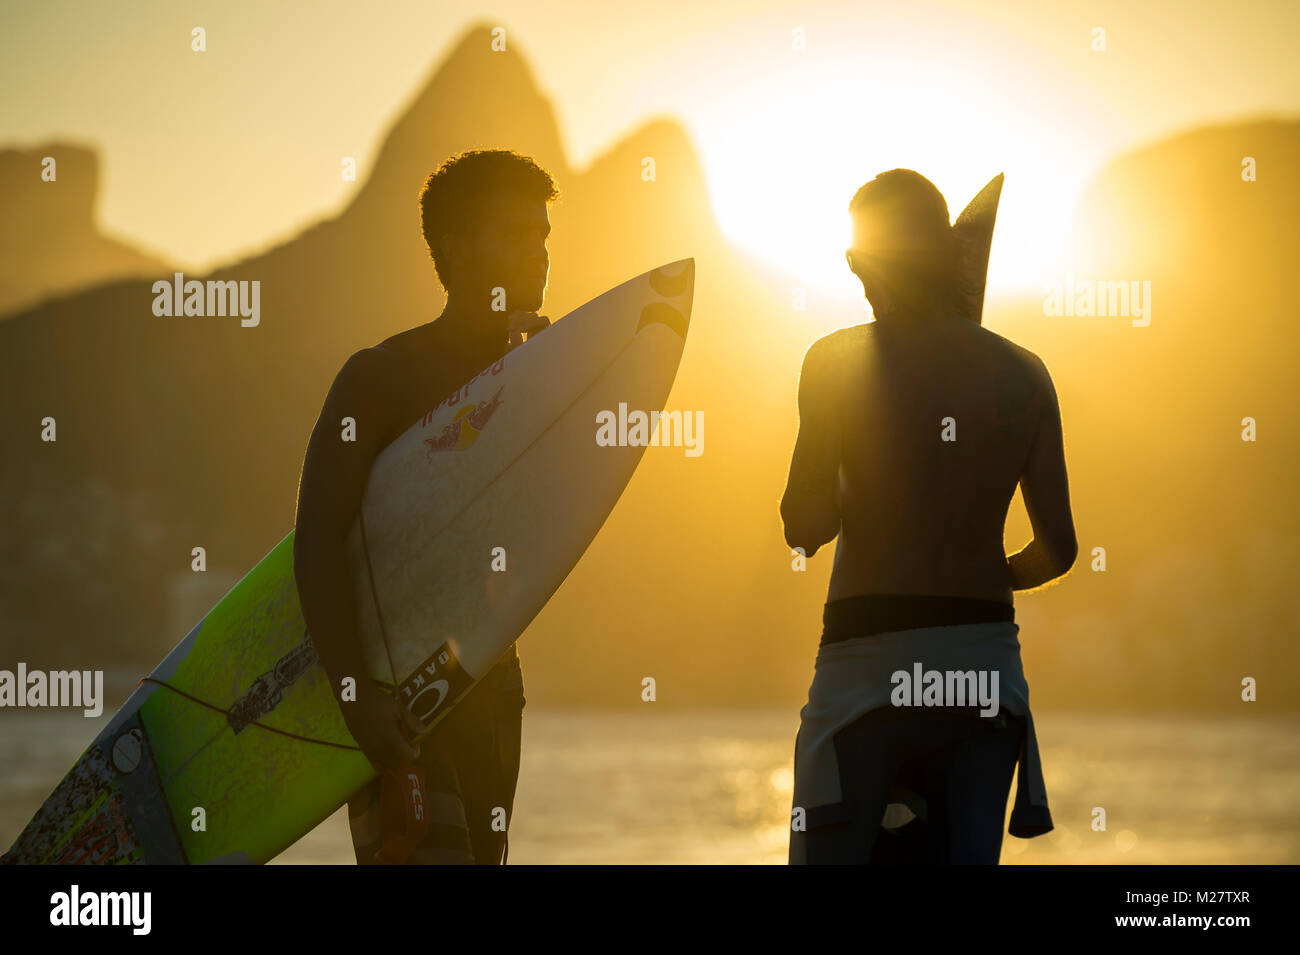 RIO DE JANEIRO - MARCH 20, 2017: Sunset silhouettes of two young surfers with surfboards at Arpoador with two brothers mountains in the background Stock Photo